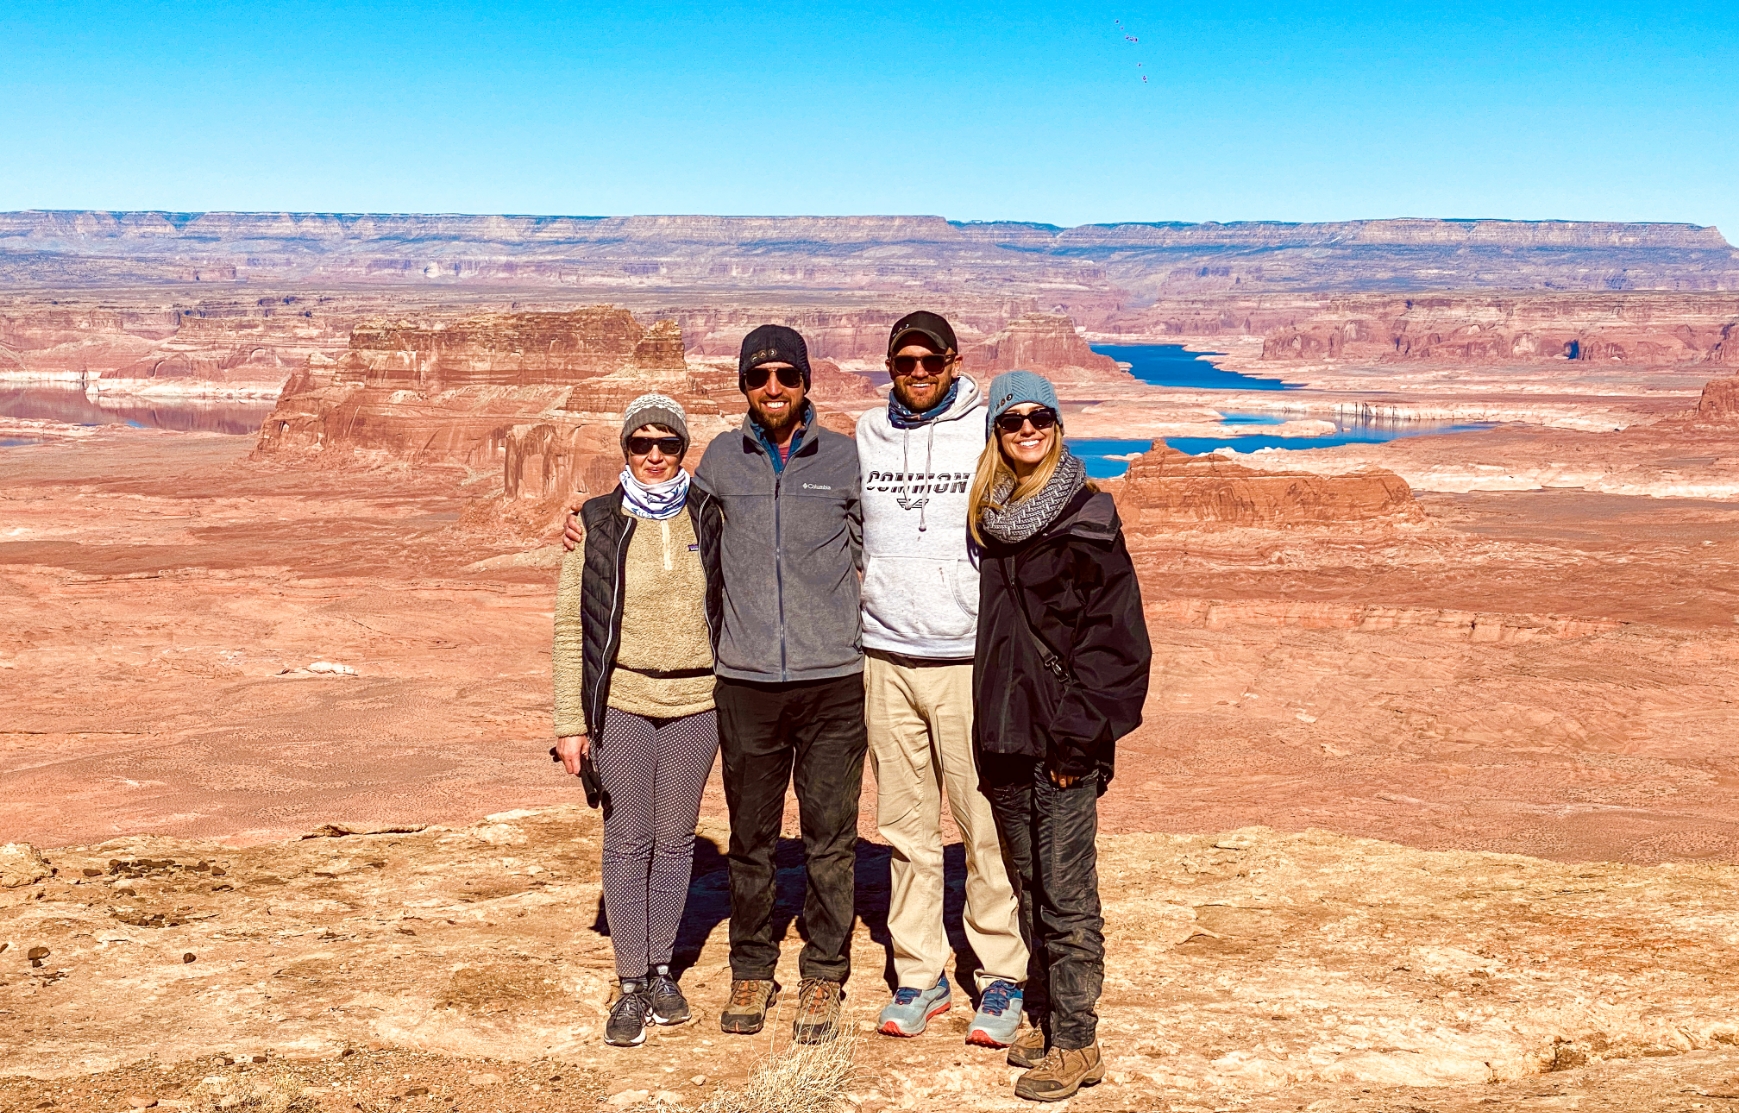 Toni Reinbold, Andrew Finn, Maxie Johnson, And Mckenzie Ranson Experience Landing On Tower Butte For The First Time To Know First Hand The Wow Factor FOR Clients